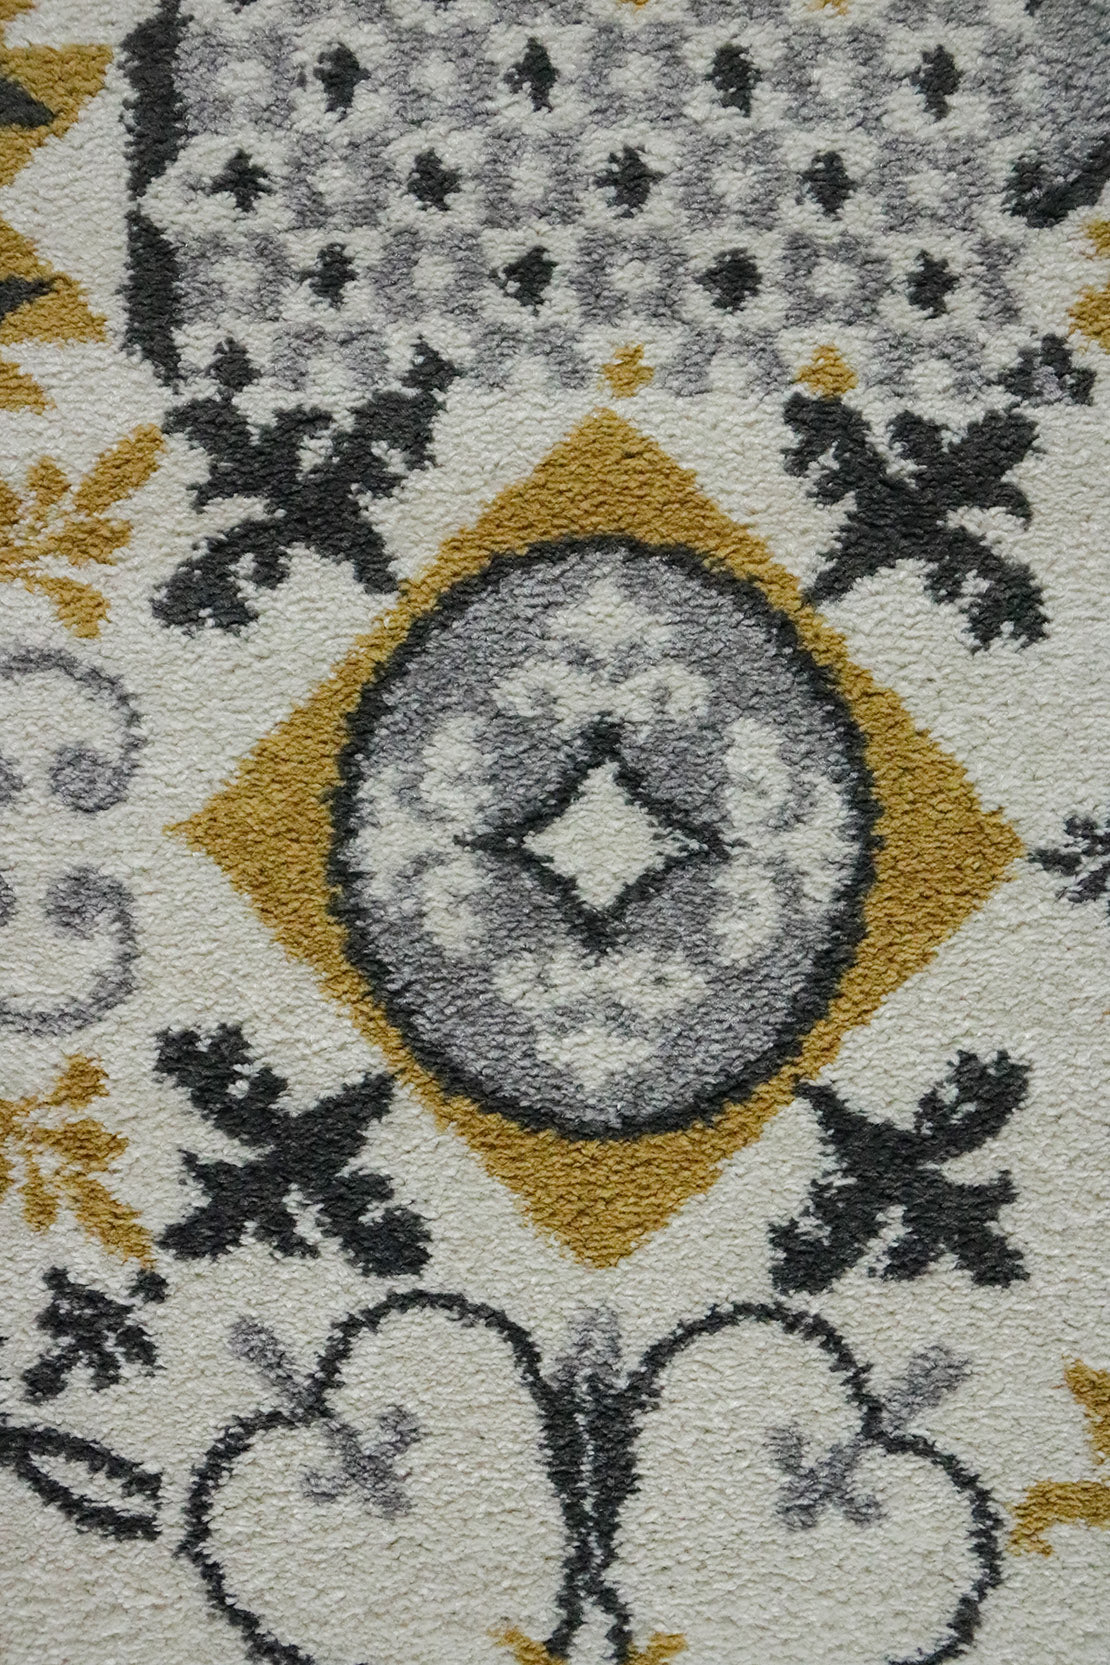 Turkish Modern Festival WD Rug - 3.9 x 5.5 FT - Cream and Yellow -  Superior Comfort, Modern Style Accent Rugs